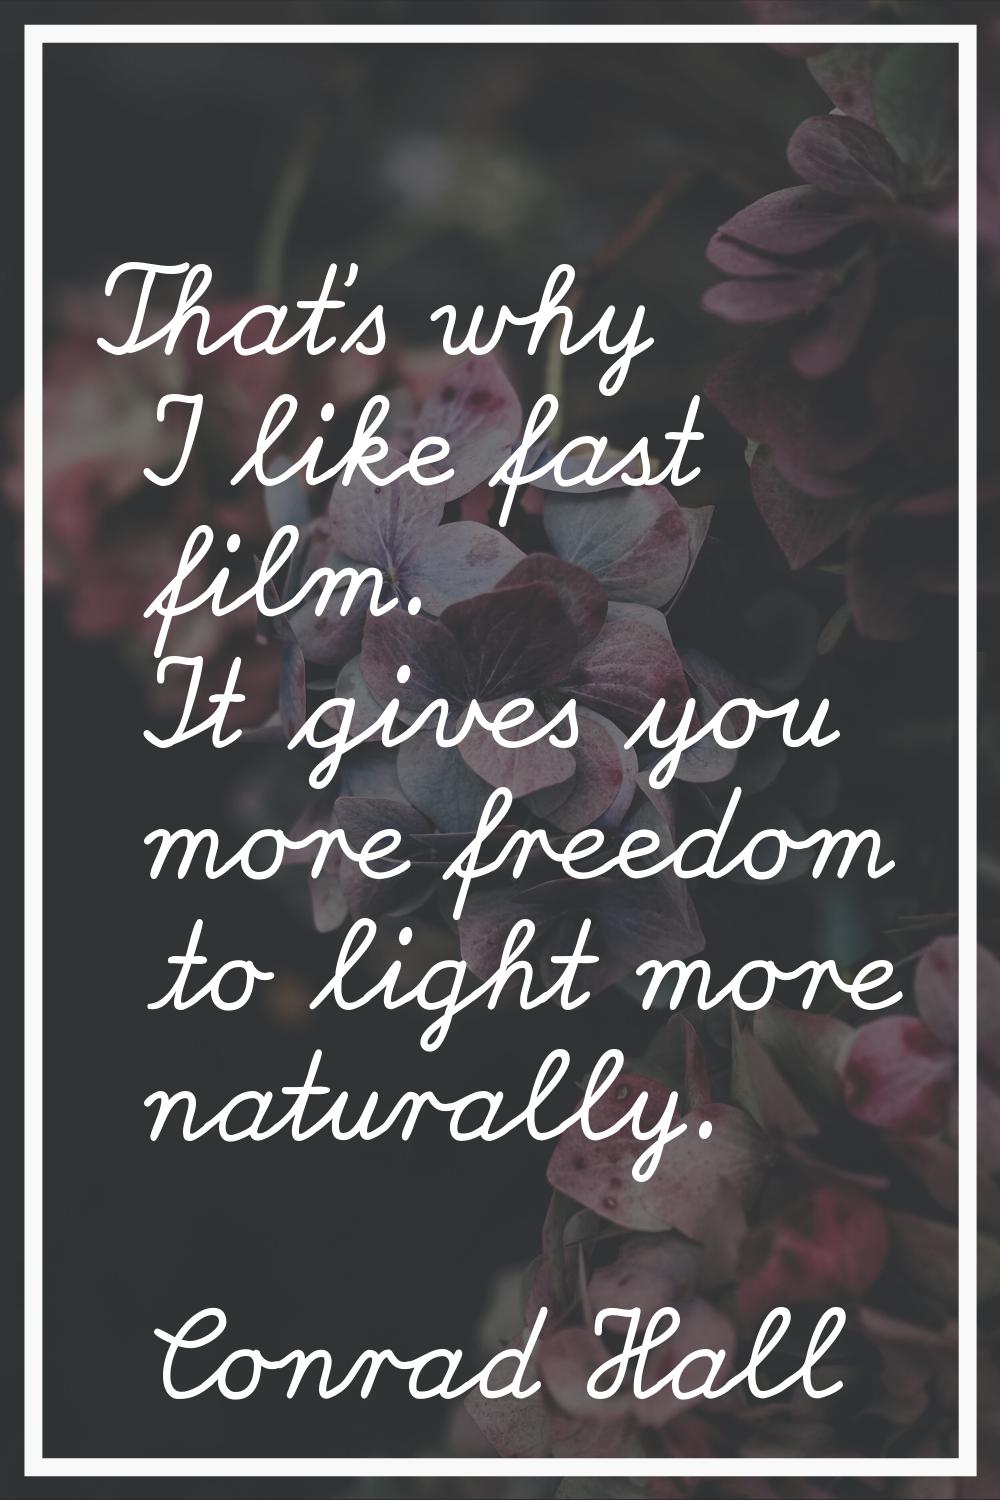 That's why I like fast film. It gives you more freedom to light more naturally.